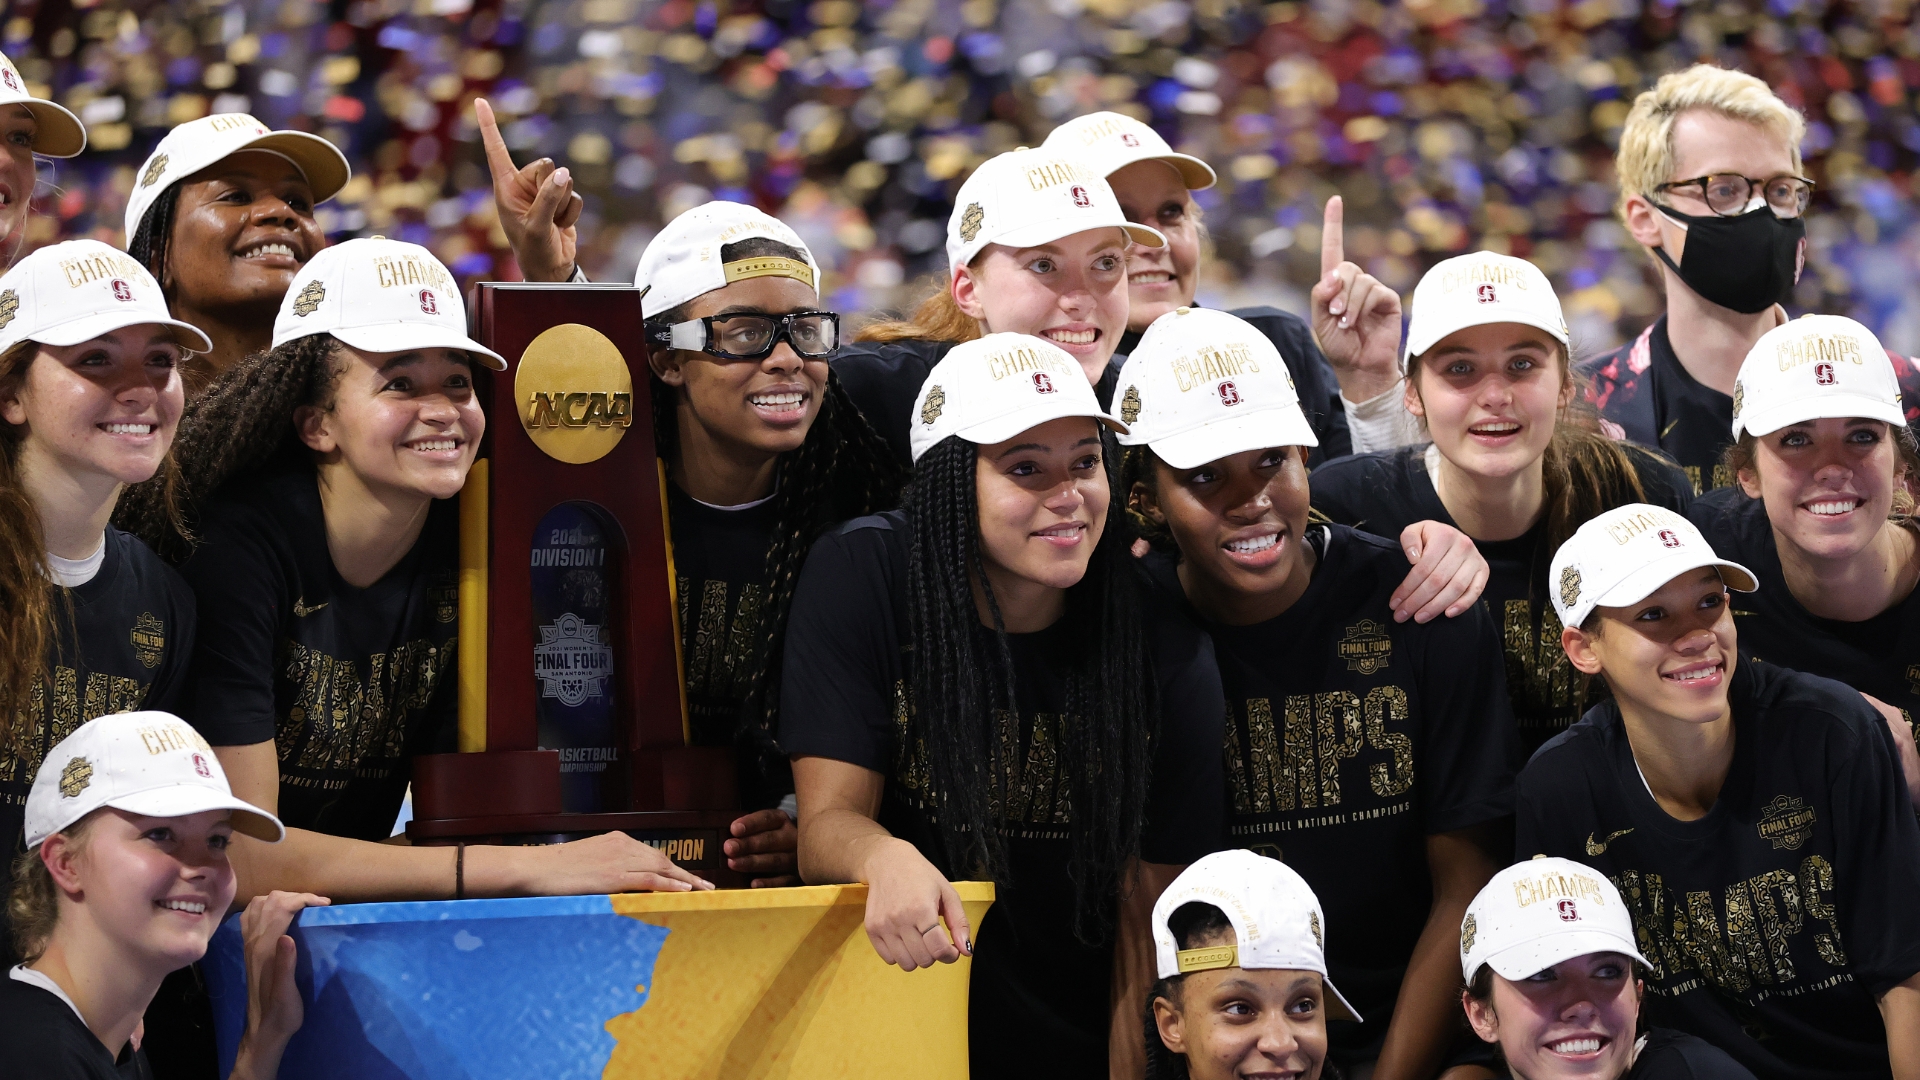 Relive the drama of the women's NCAA tournament